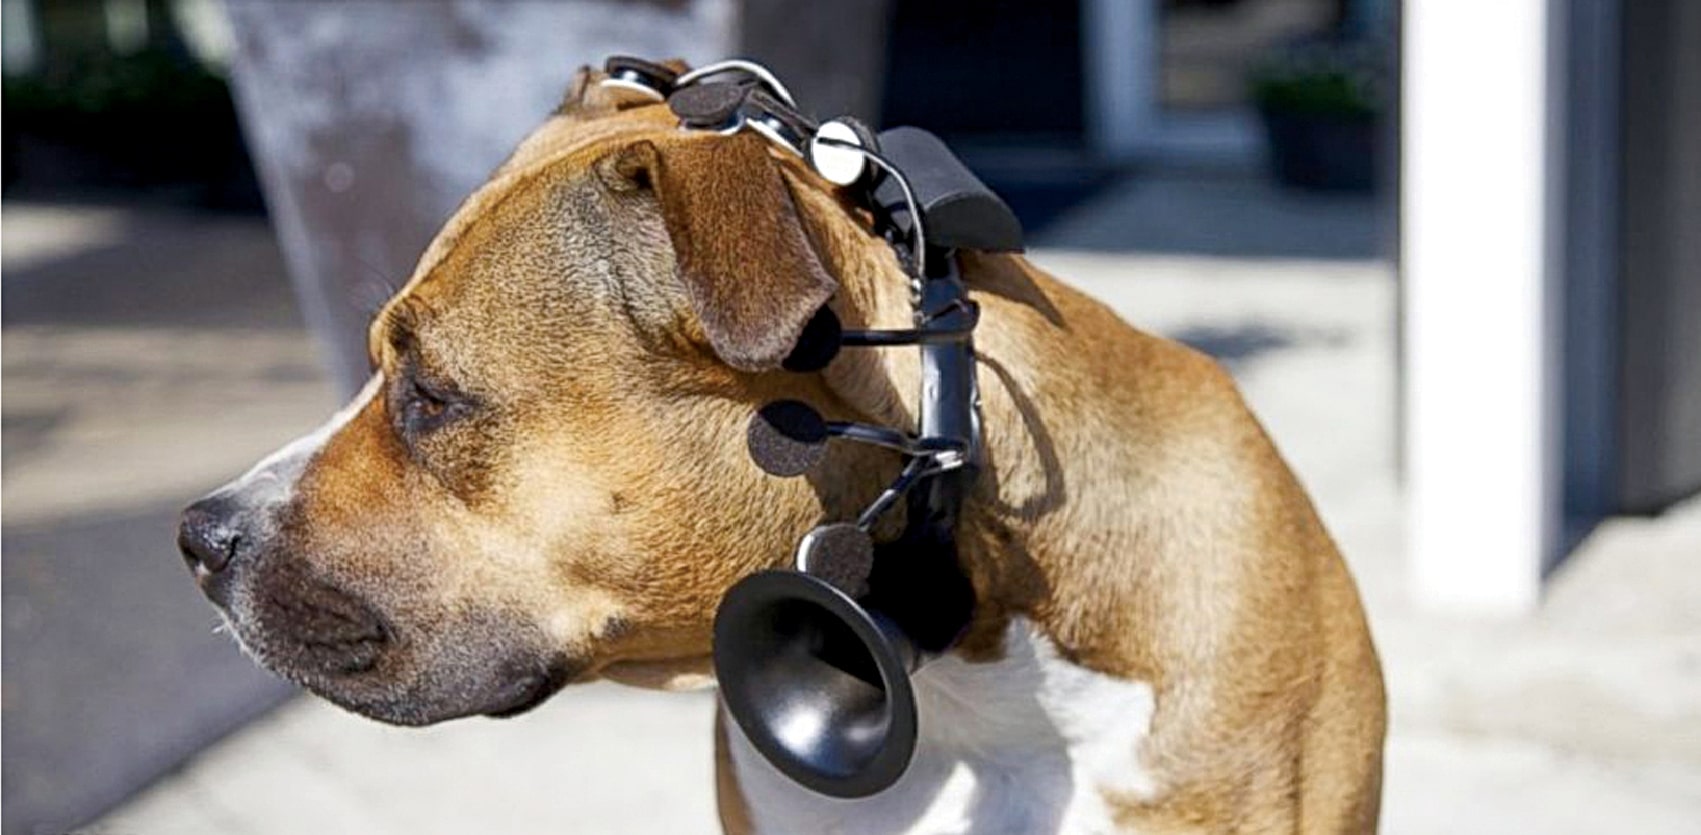 How Technology Is Enabling Communication With Animals